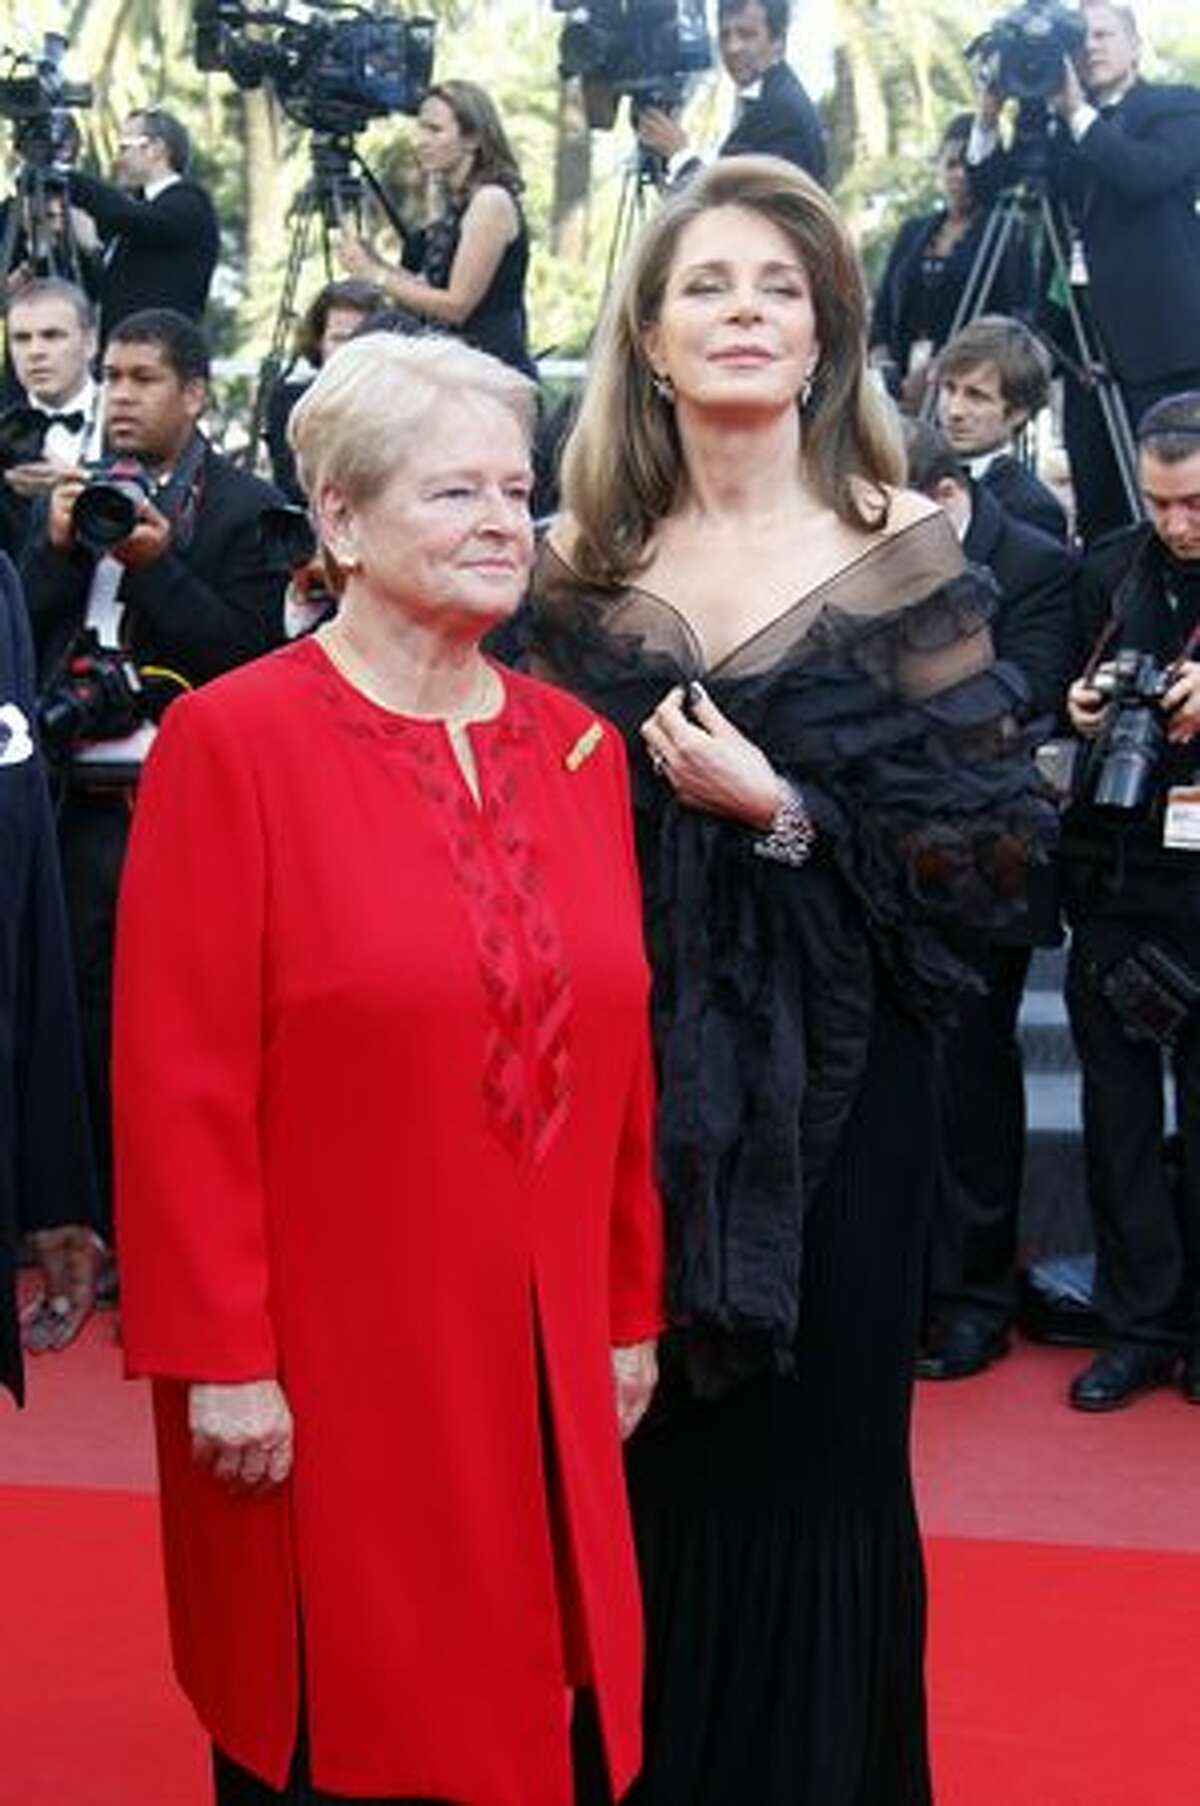 Queen Noor of Jordan (R) and former Norway's Prime Minister Dr Gro Bruntland (C) arrive for the screening of "Biutiful" presented in competition at the 63rd Cannes Film Festival in Cannes.